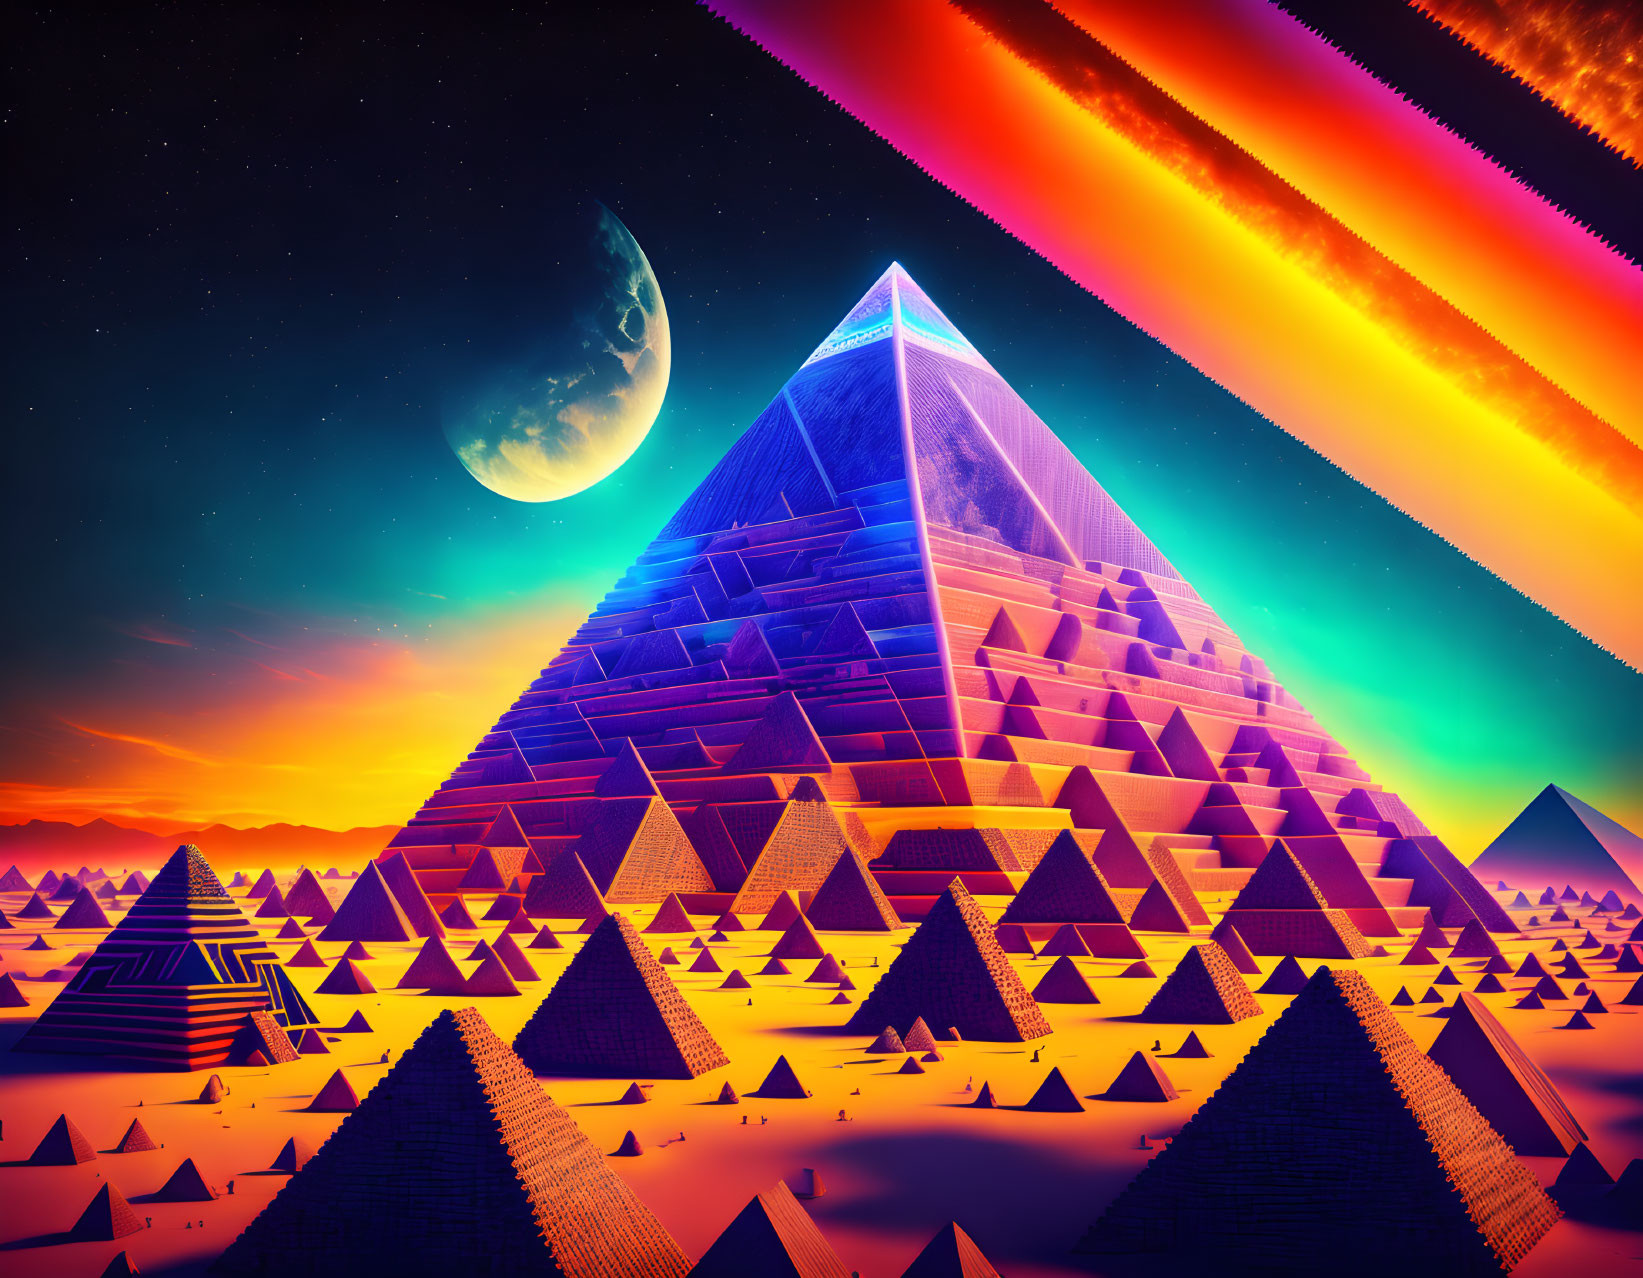 Surreal landscape with glowing pyramids under starry sky